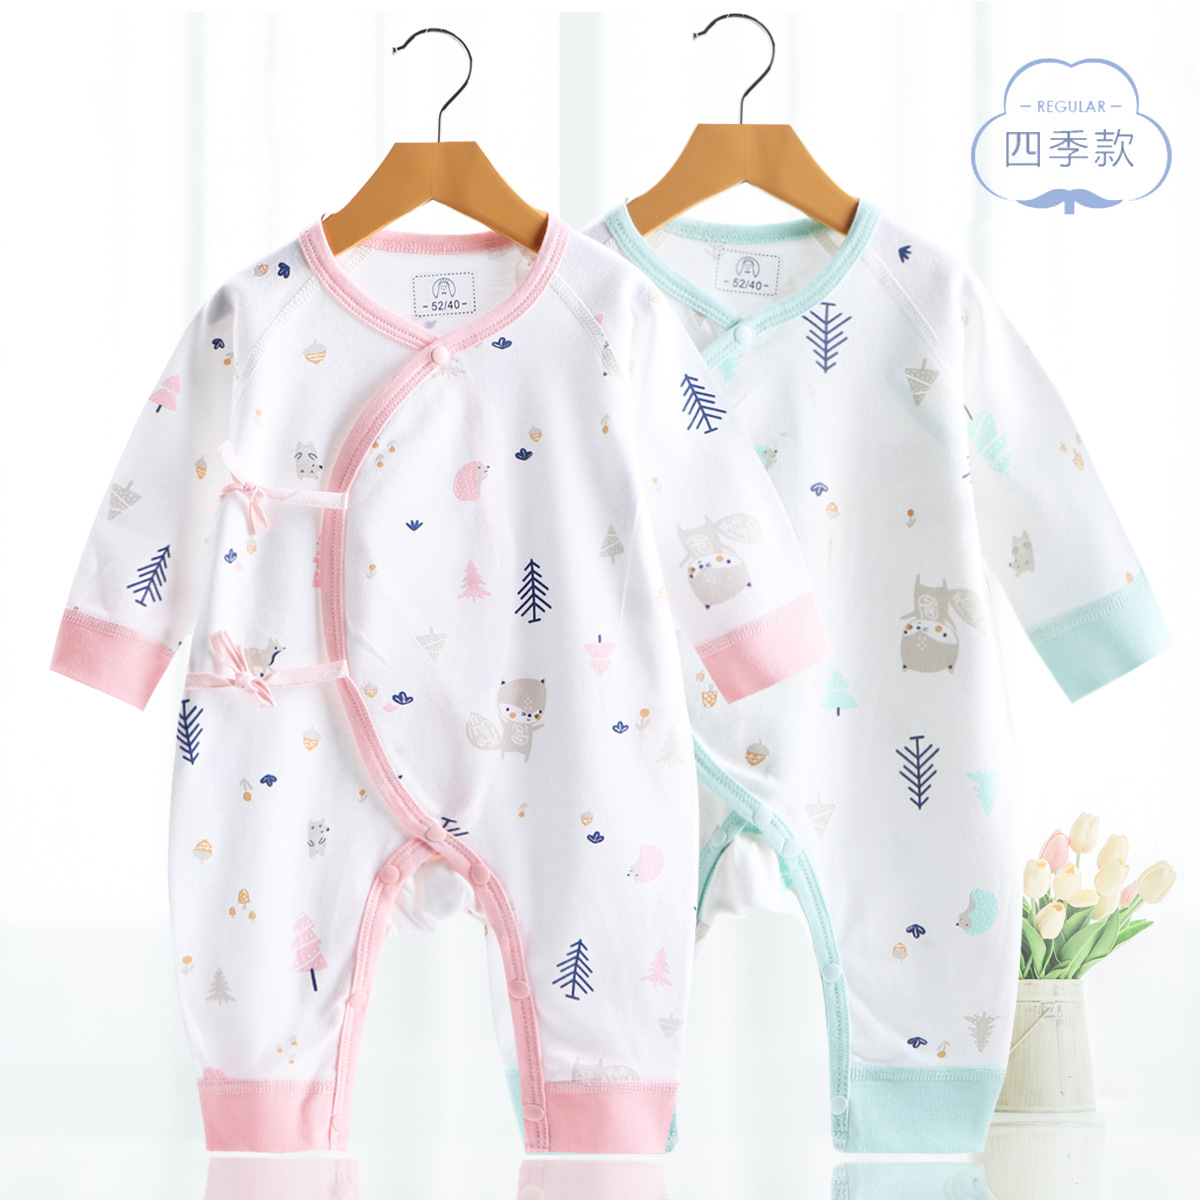 Baby Jumpsuit Spring and Autumn Class a Newborn Clothes Pure Cotton Boneless Baby Base Clothing Long Sleeve Children Jumpsuit Baby Clothes